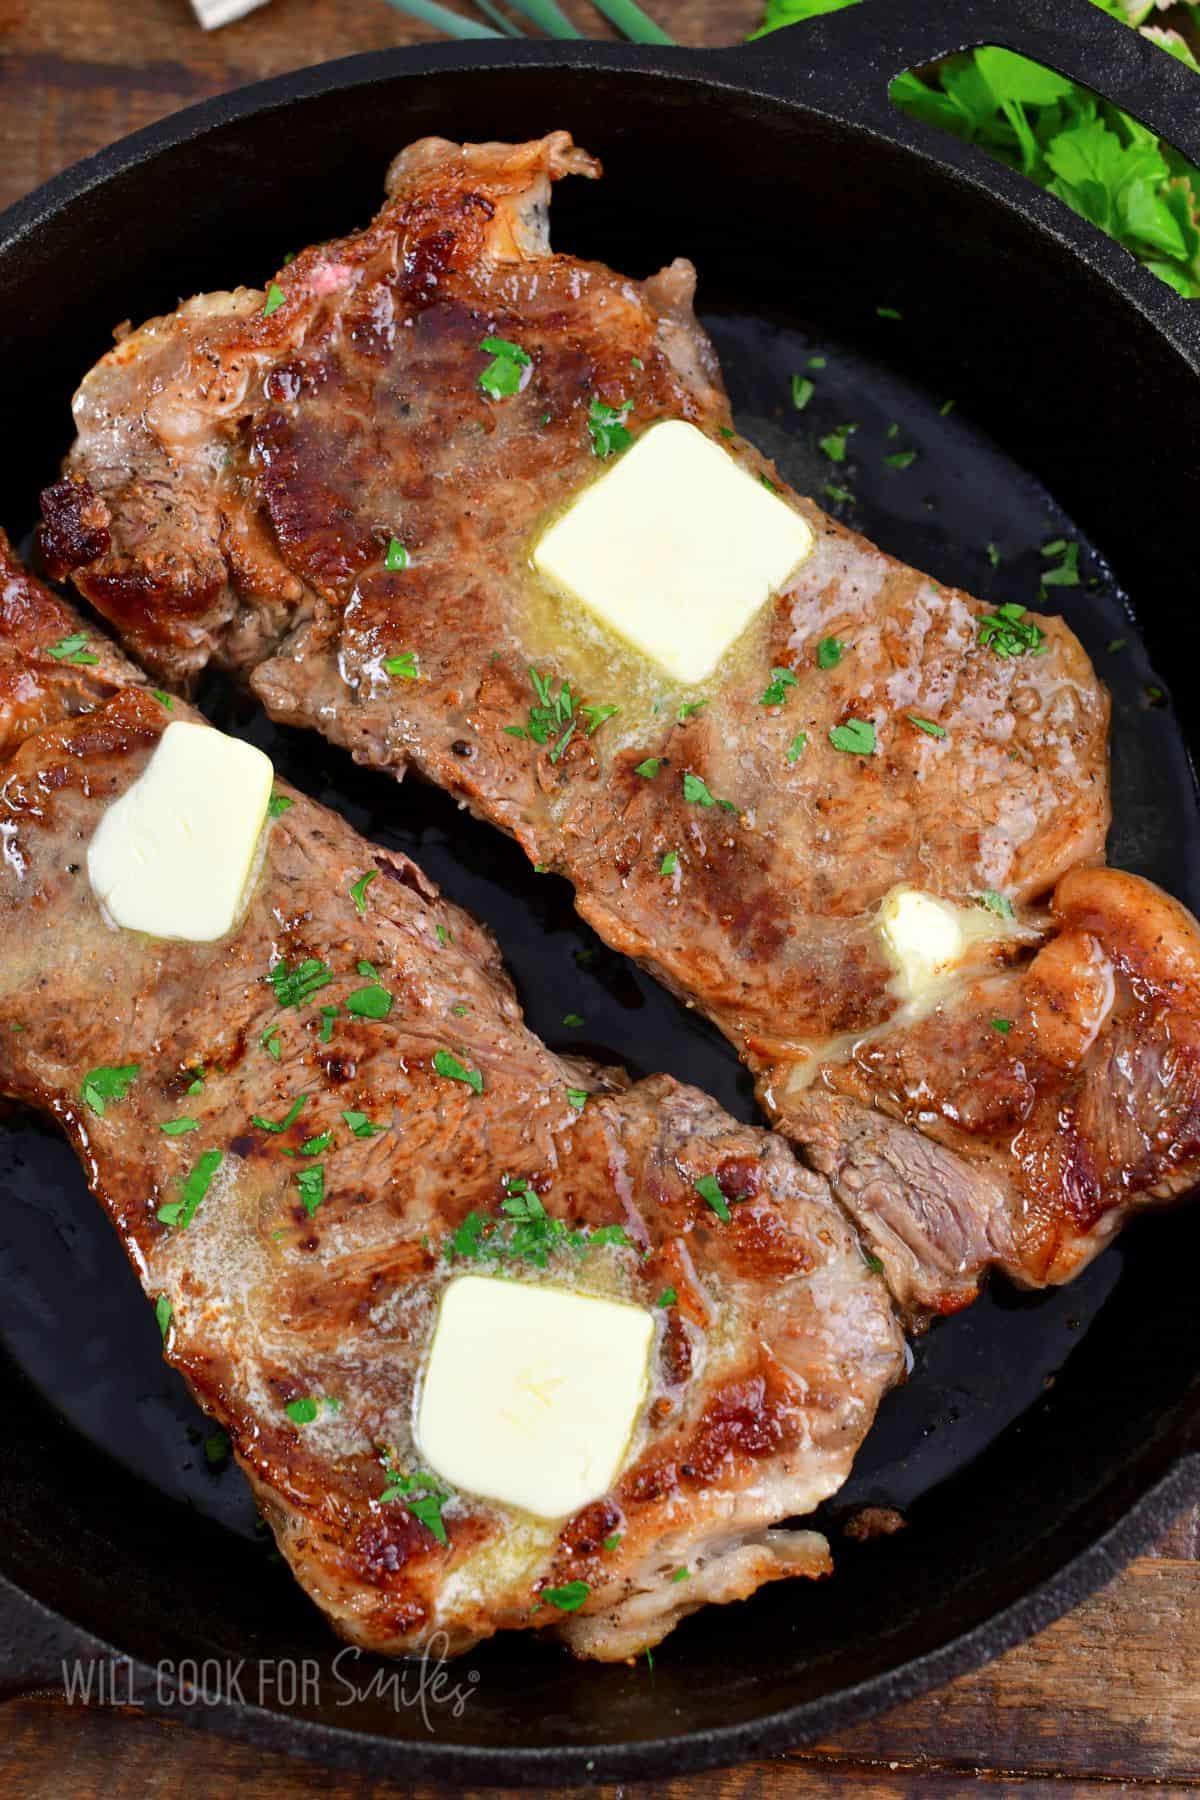 butter slices melting on top of two cooked steaks in a cast iron skillet.